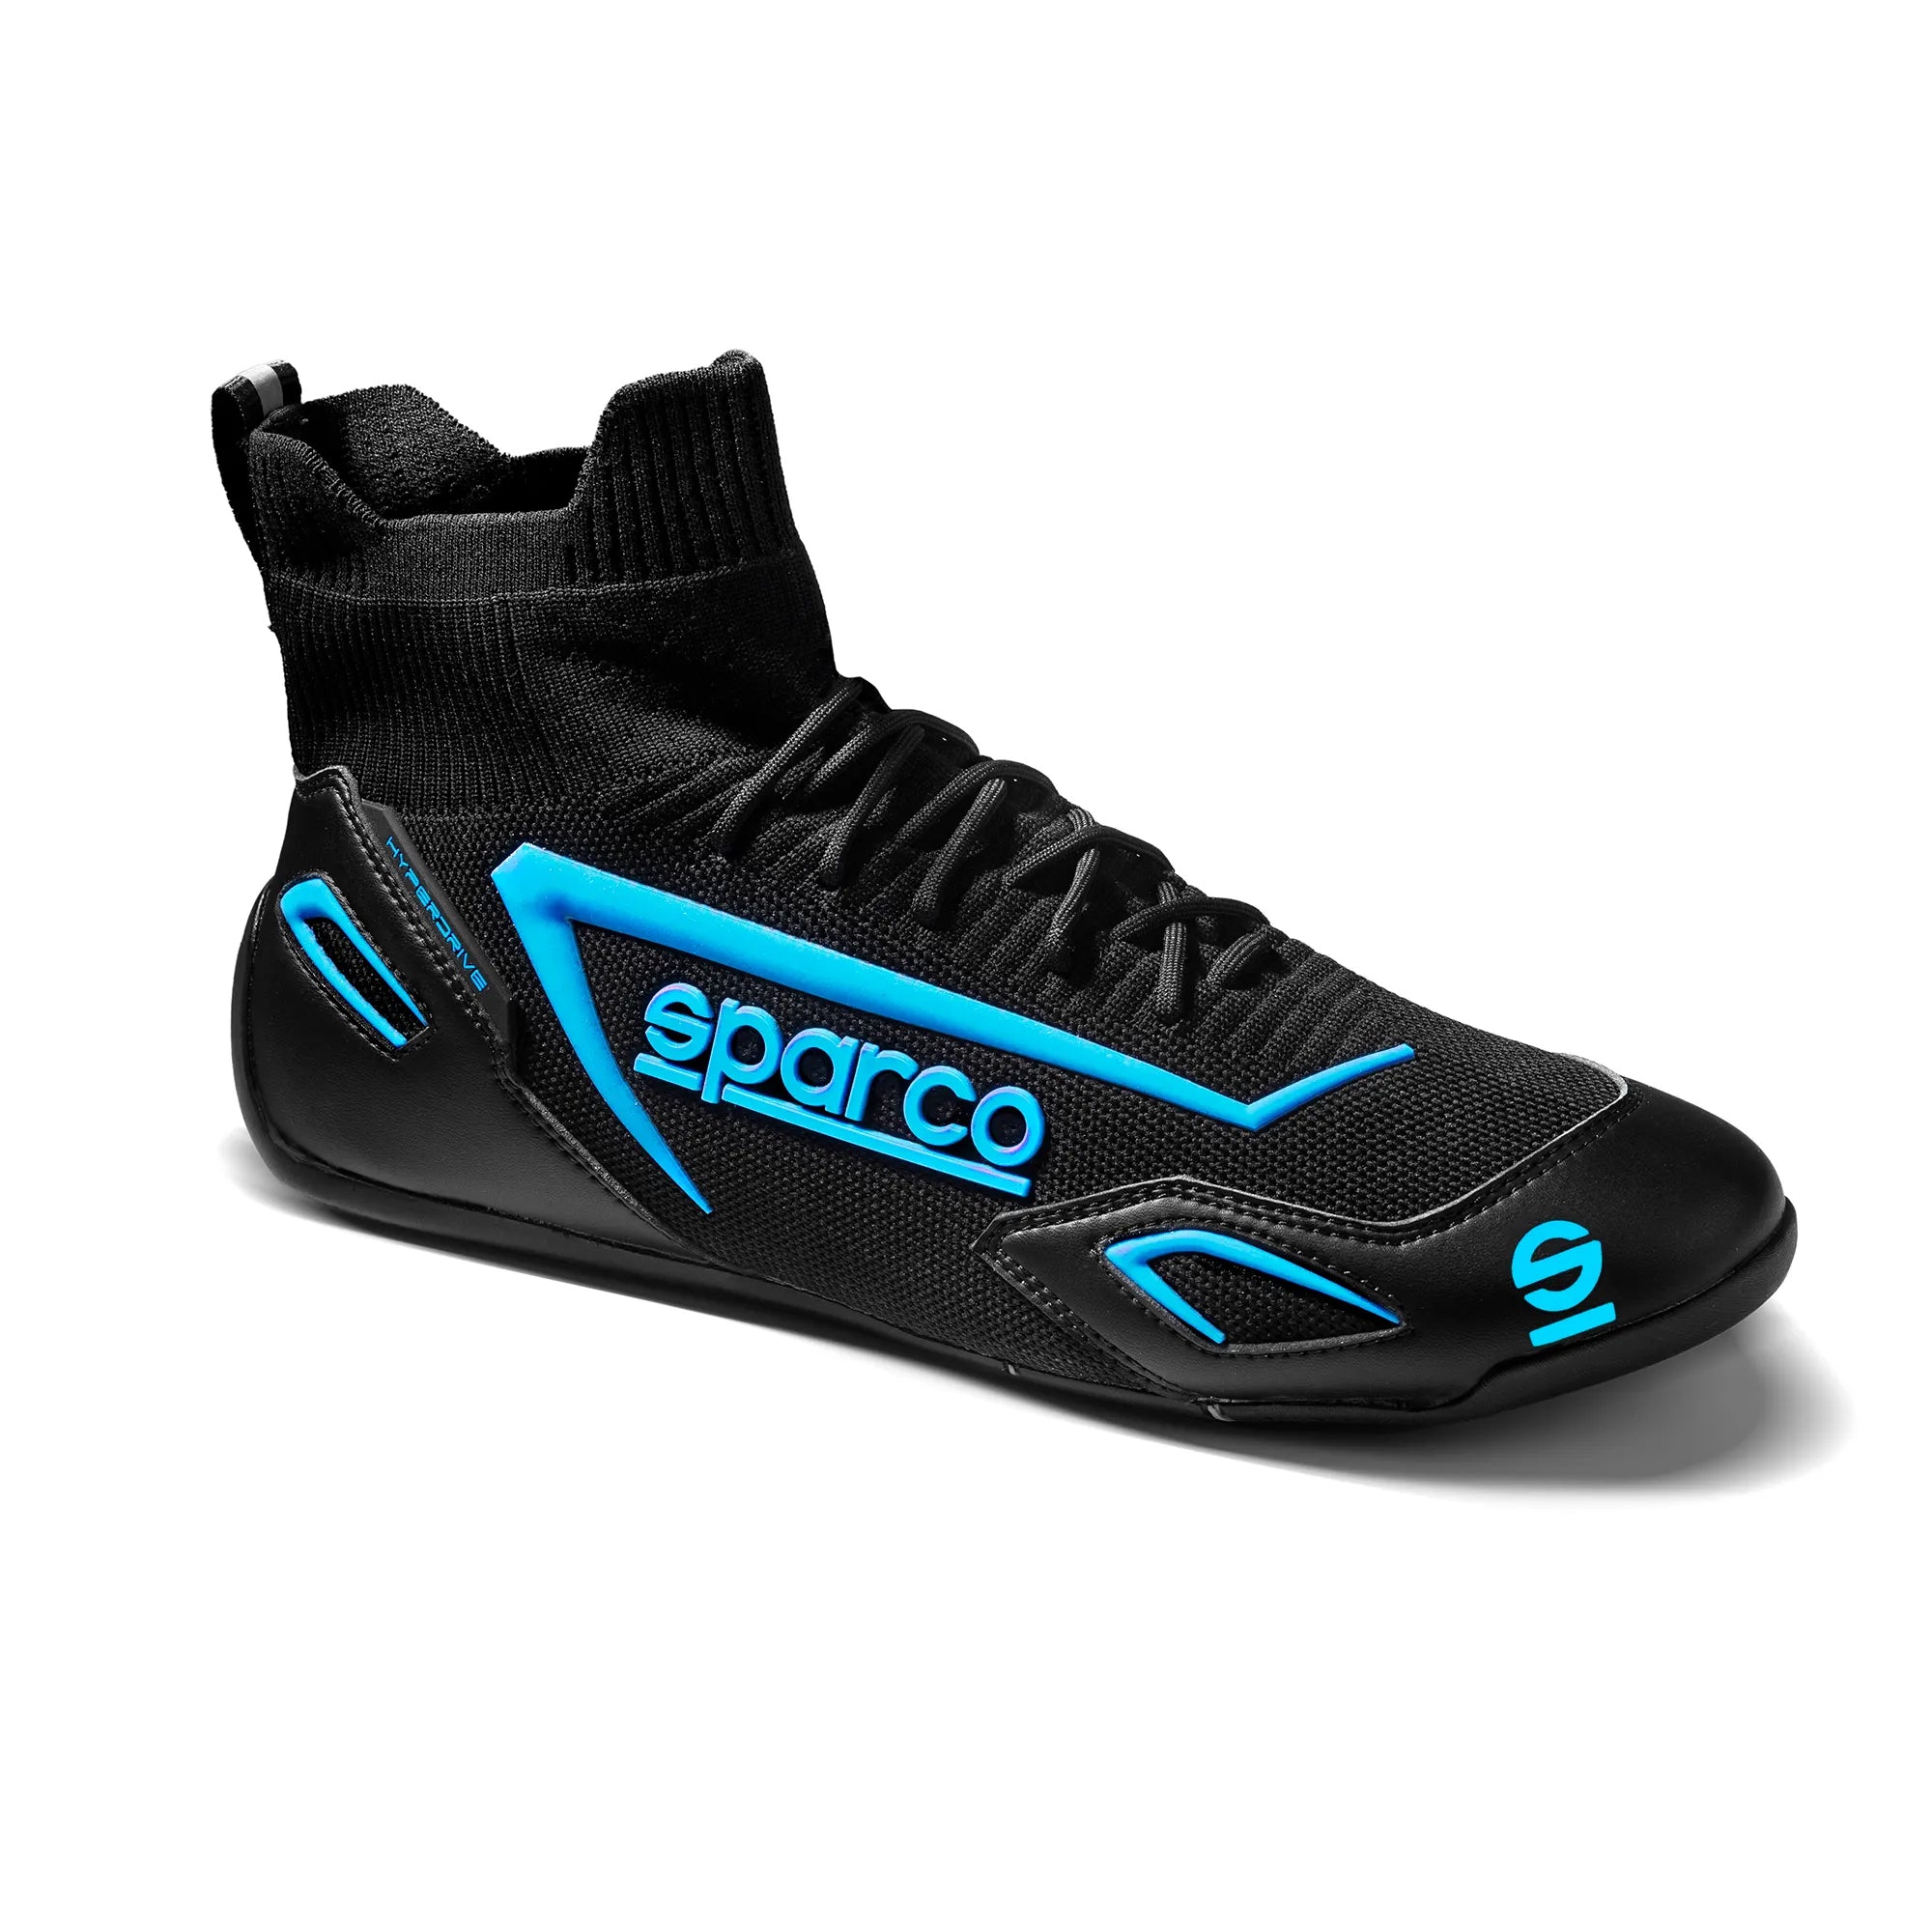 SPARCO 00129344NRAZ Gaming sim racing shoes HYPERDRIVE, black/blue, size 44 Photo-1 